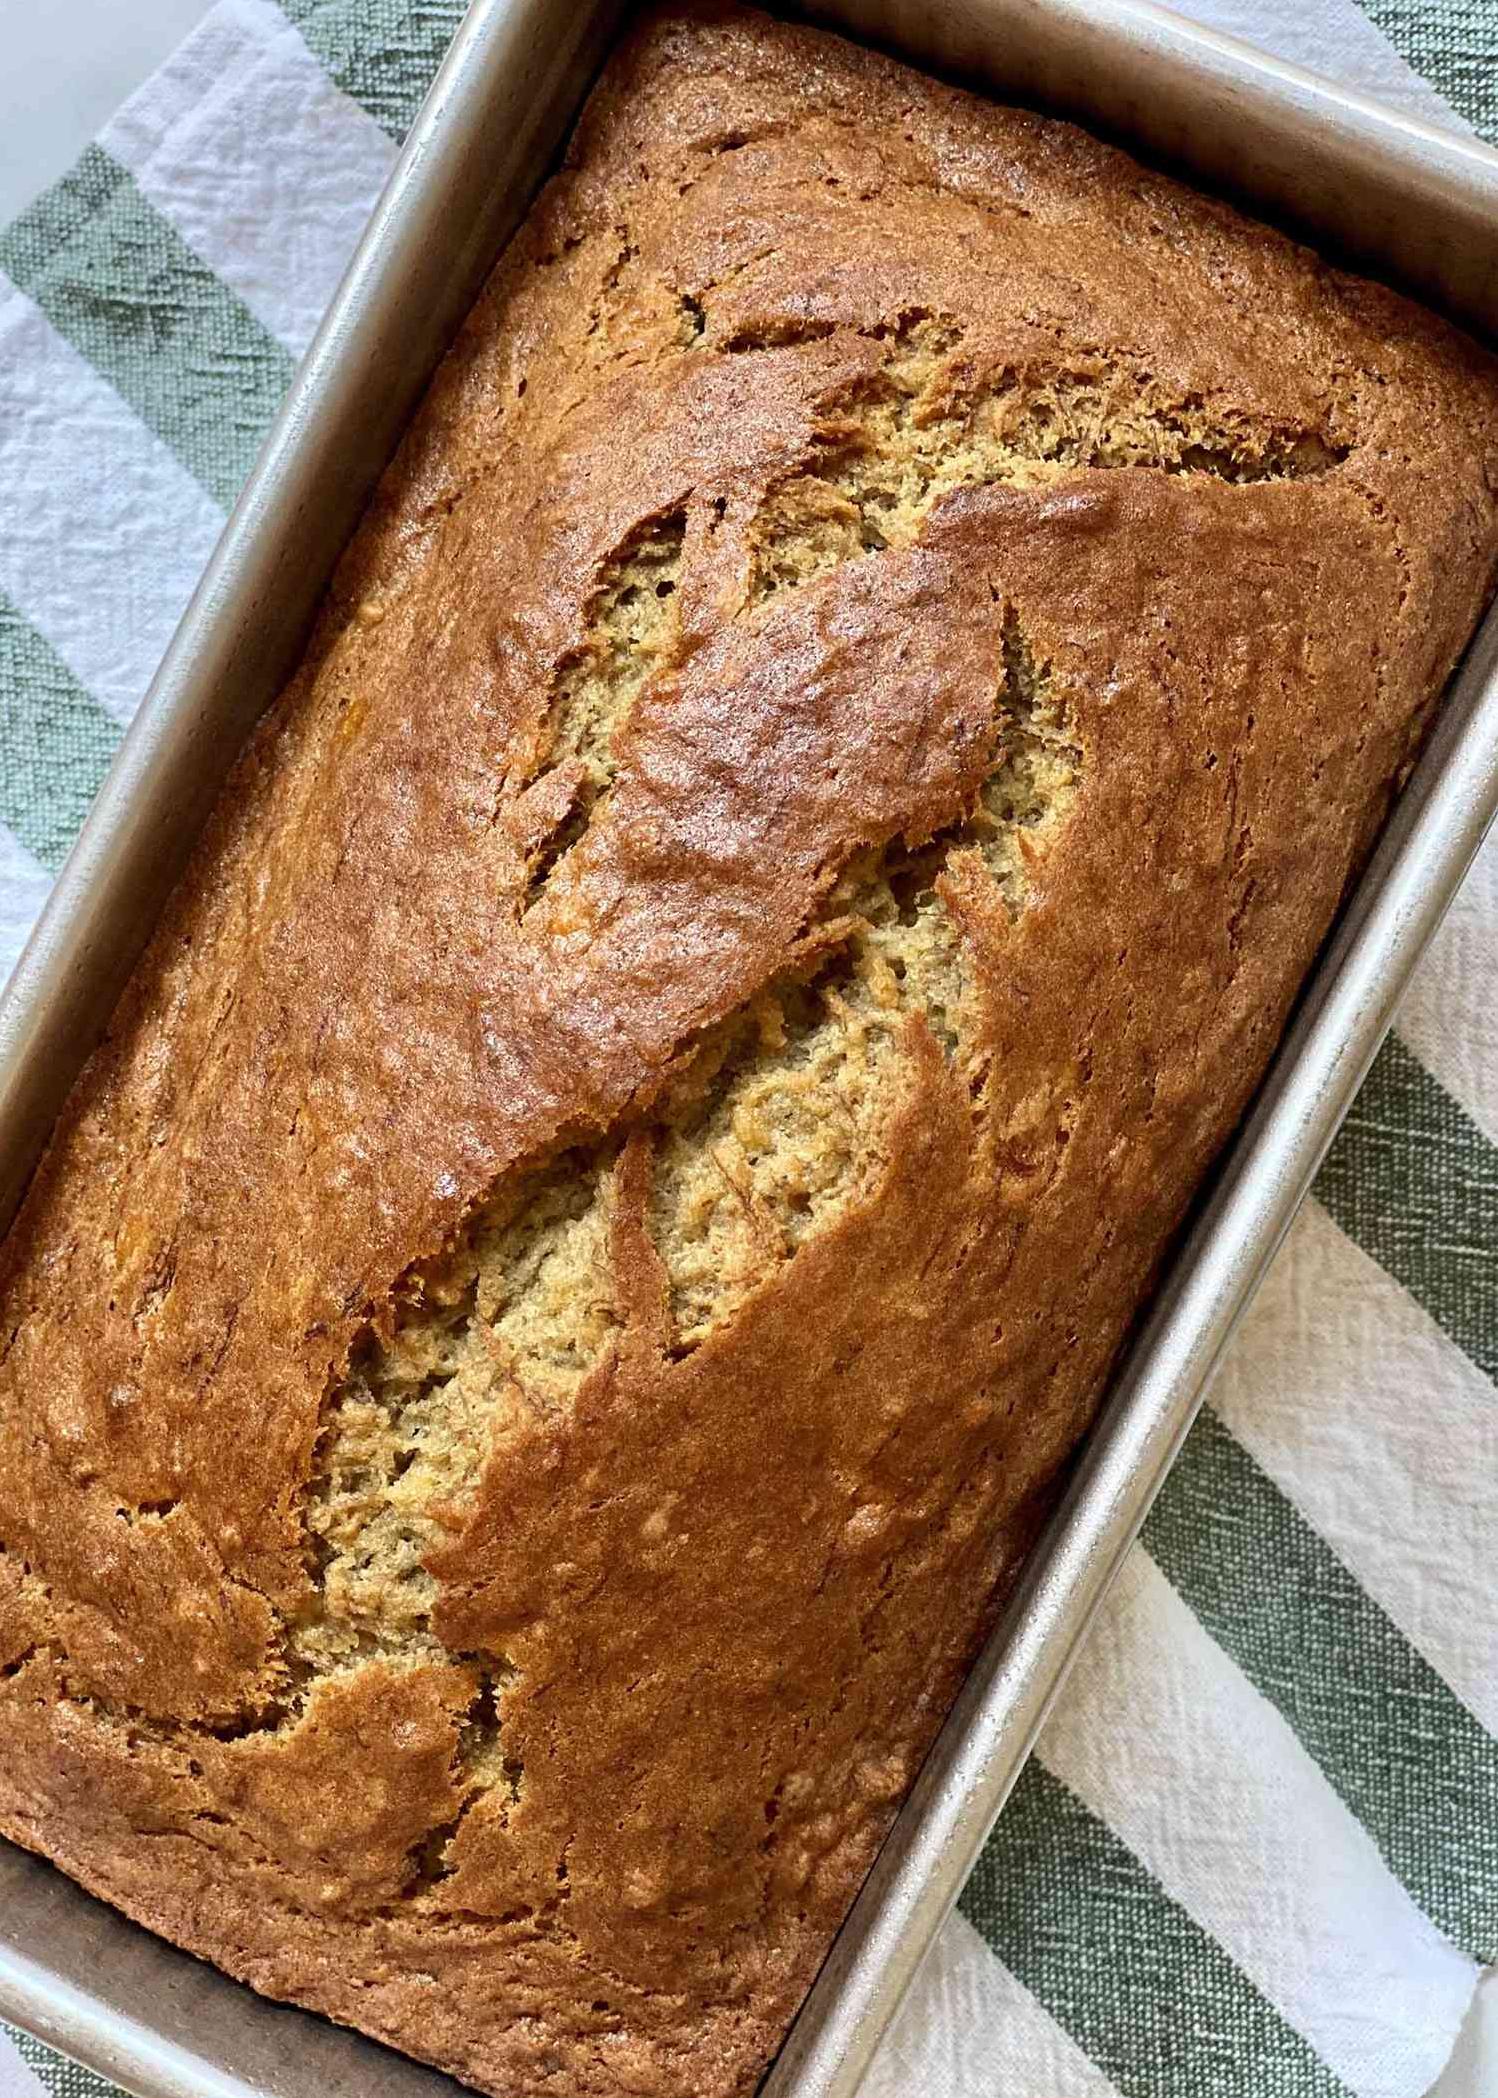  Smells like home: The aroma of freshly baked banana bread filling up the kitchen